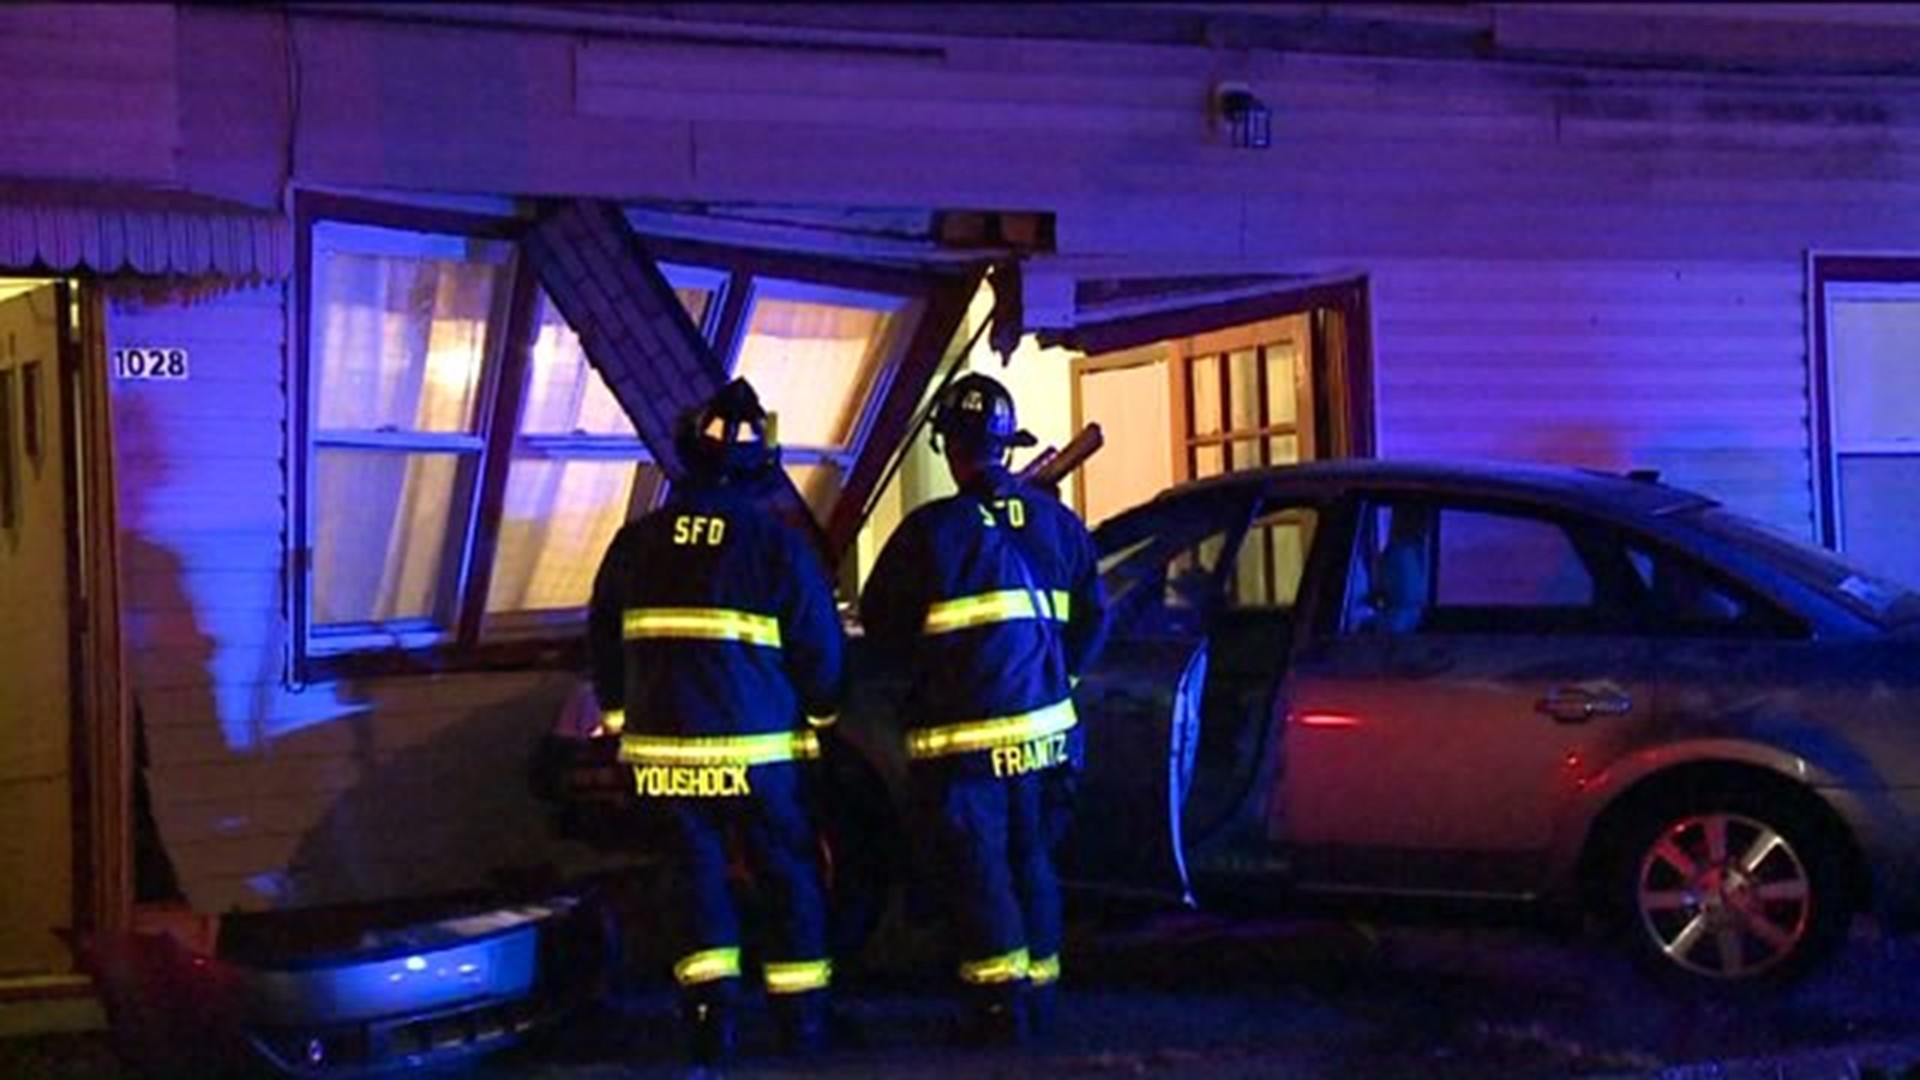 Police: Inexperienced Driver Hit Parked Car, Building in Scranton